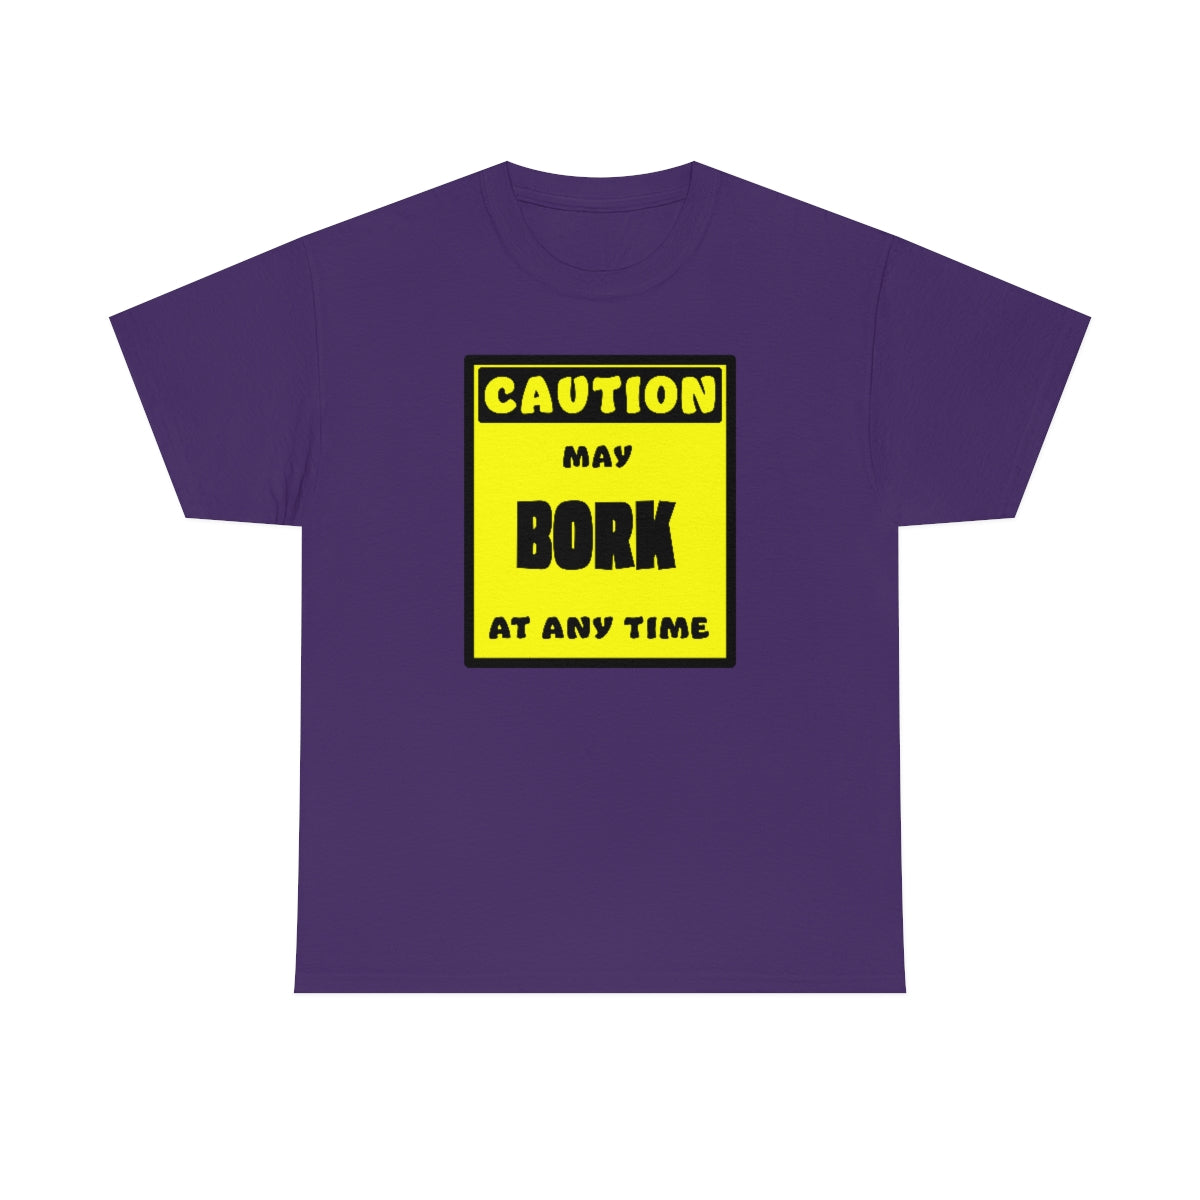 CAUTION! May BORK at any time! - T-Shirt T-Shirt AFLT-Whootorca Purple S 